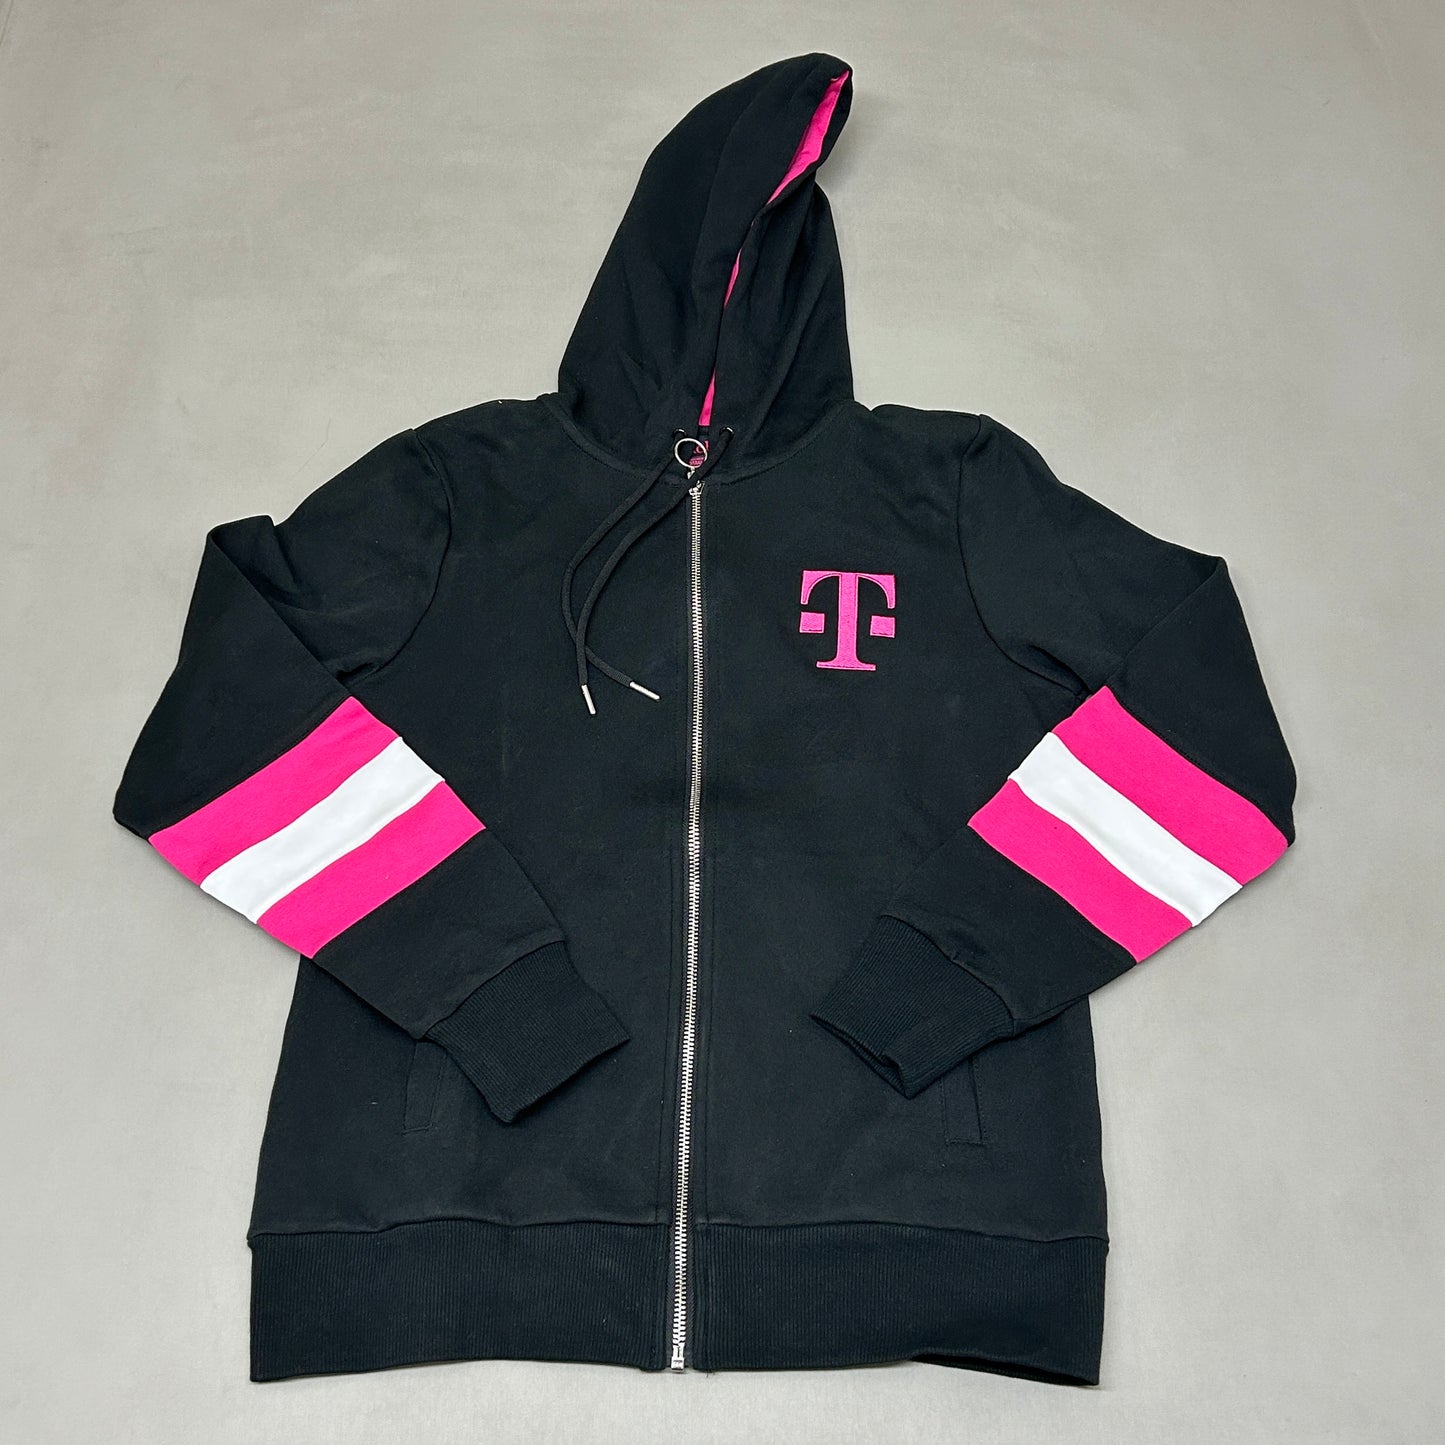 T-MOBILE Hooded Striped Logo Employee Zipped Jacket Women's Small Black/Pink (New)